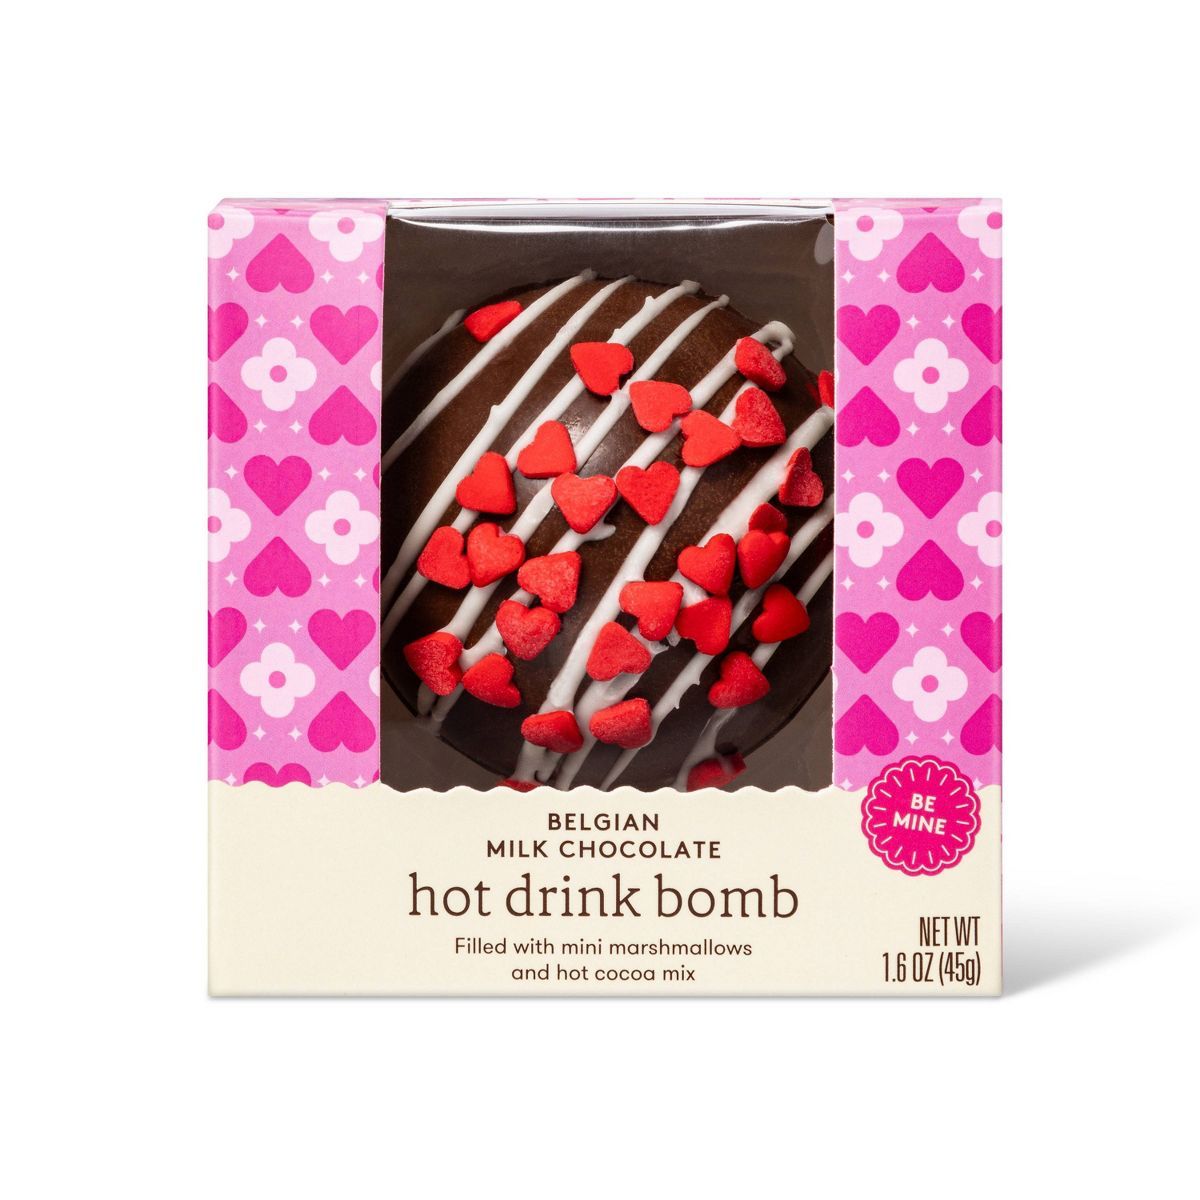 Valentine's Gourmet Belgian Milk Chocolate Cocoa Bomb with Heart Quins - 1.6oz - Favorite Day™ | Target